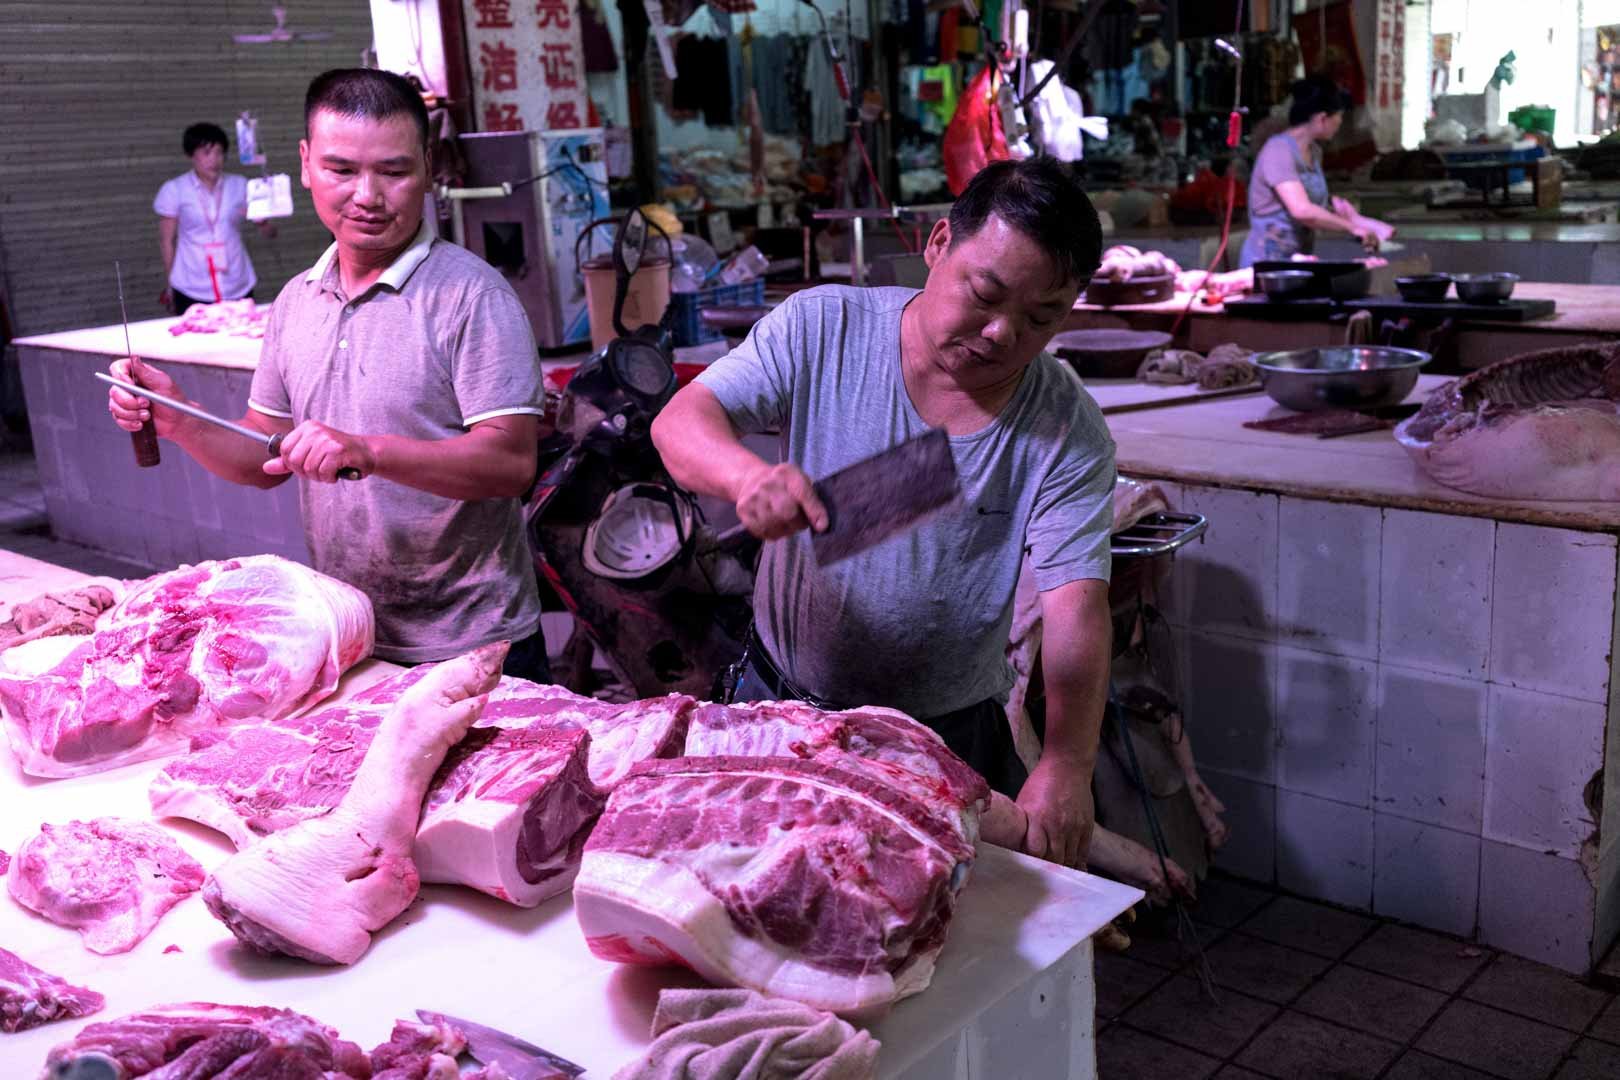 African Swine Fever in China